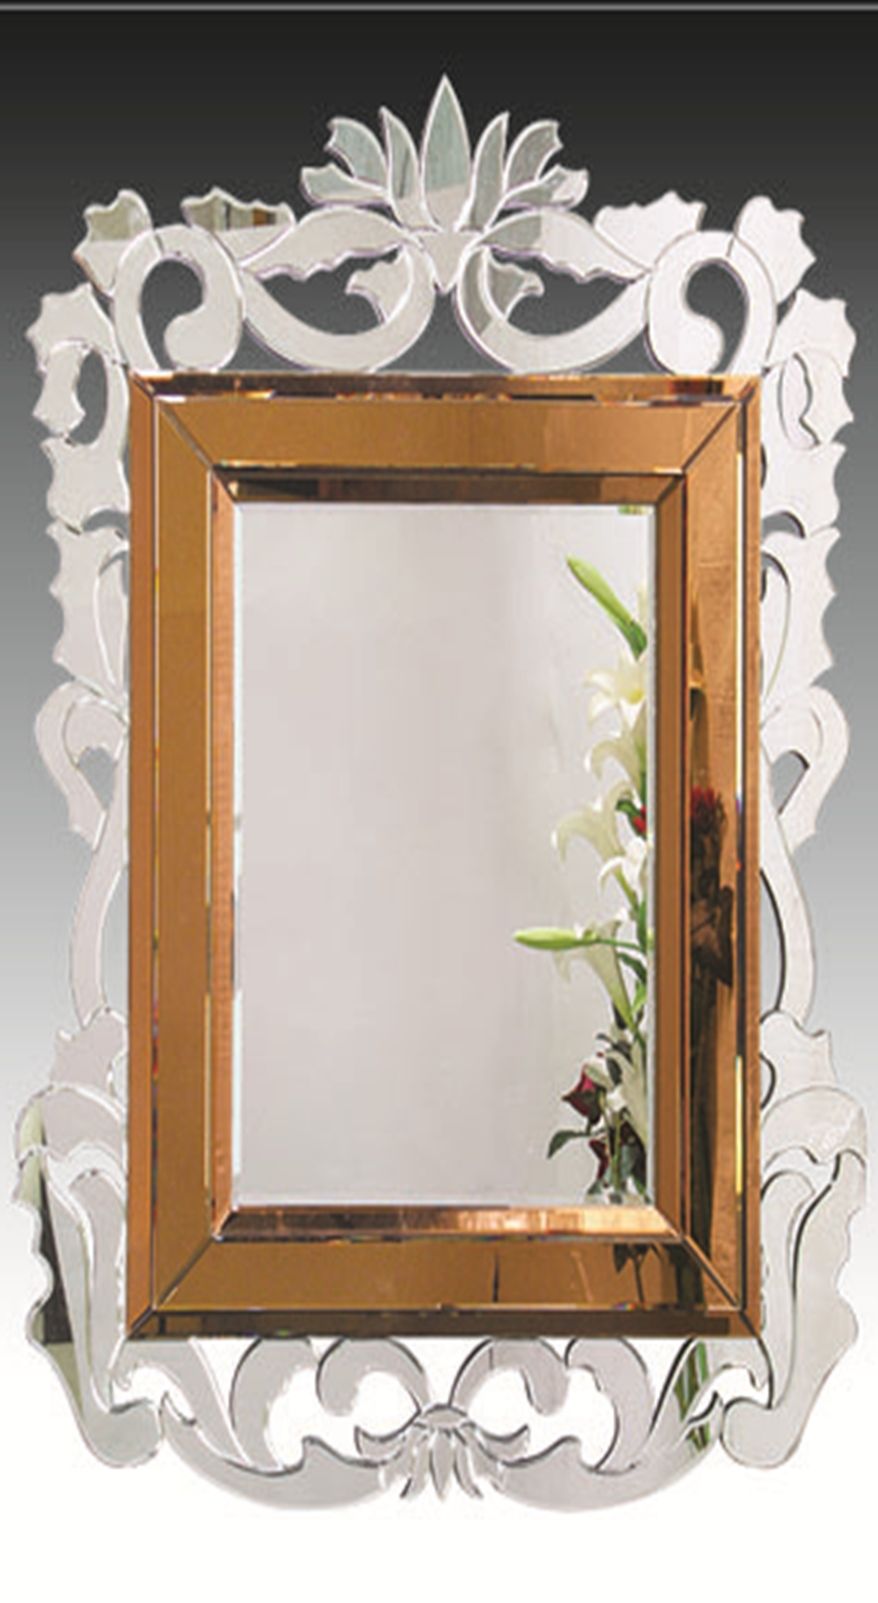 French Baroque Style Bronze Venetian Wall Mirror Jh004 Intended For Baroque Style Mirrors (View 9 of 15)